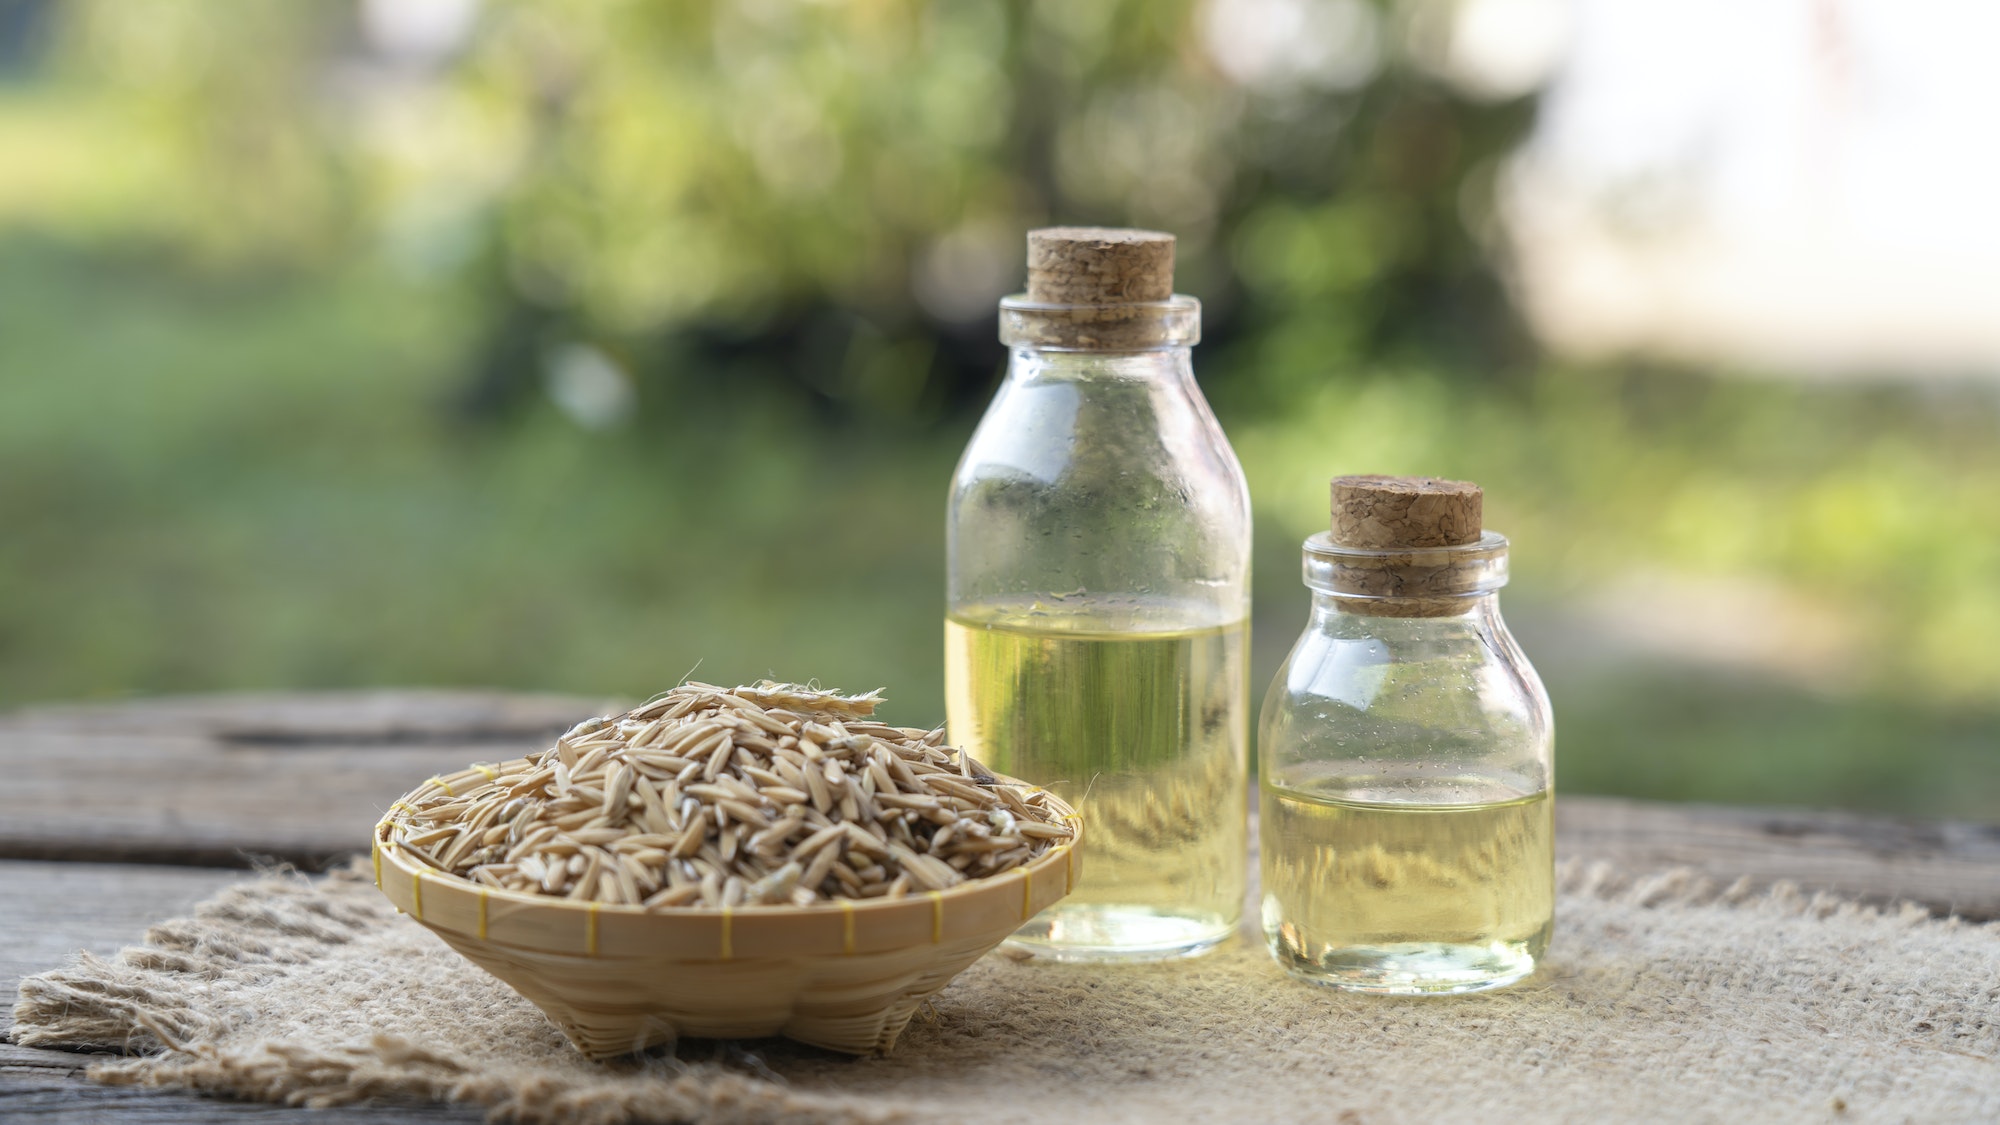 Rice bran oil is extracted from rice bran. Rich in good fats, .